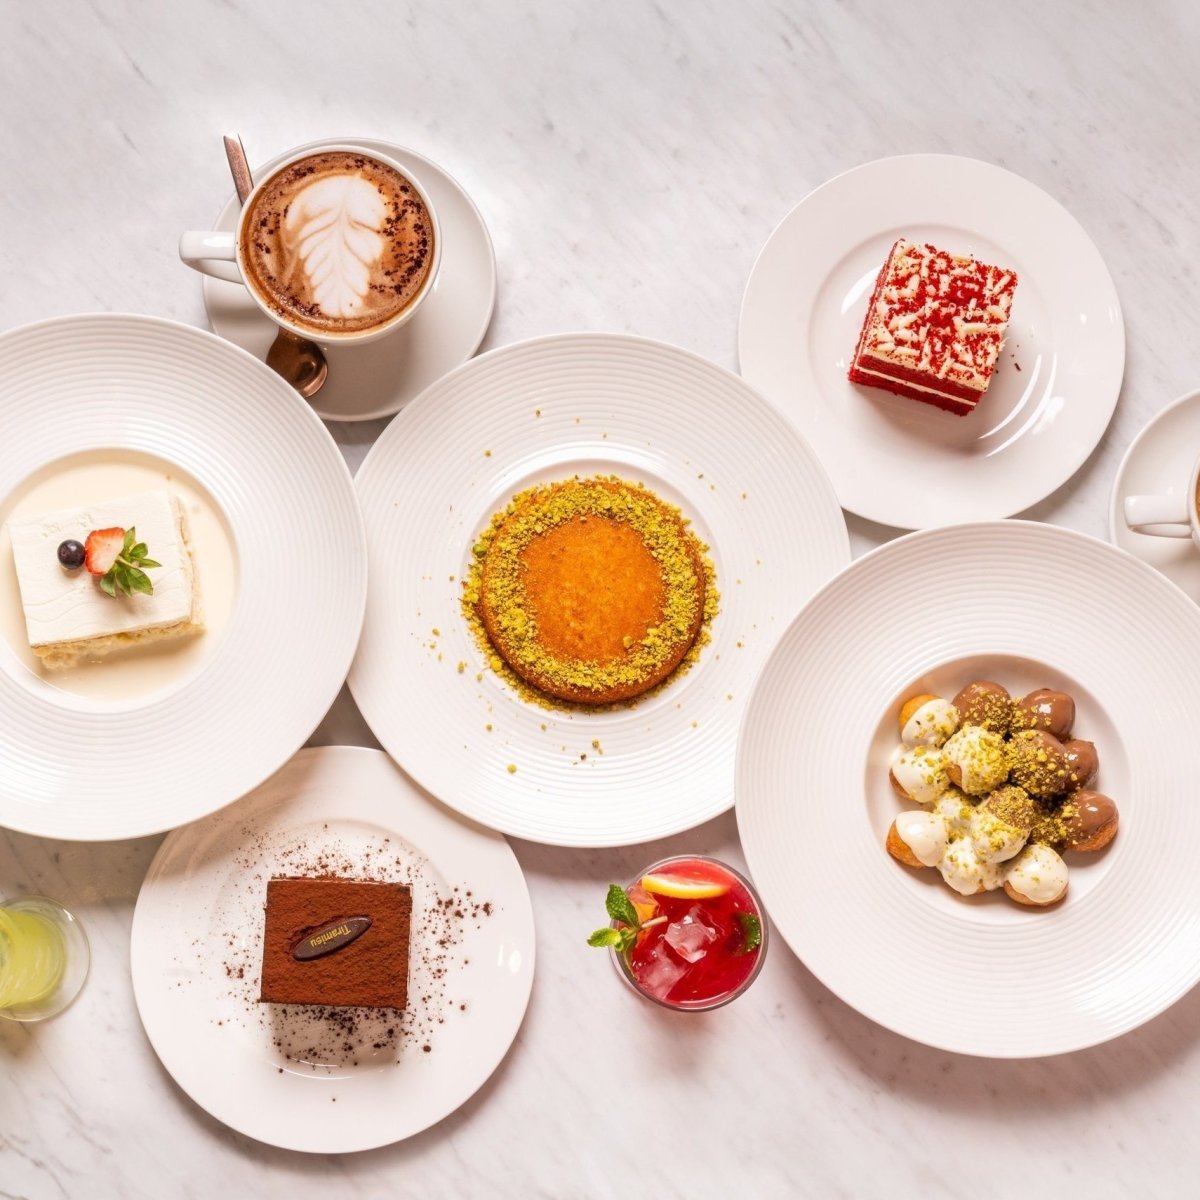 Chocoberry London To Open On The Boulevard Today